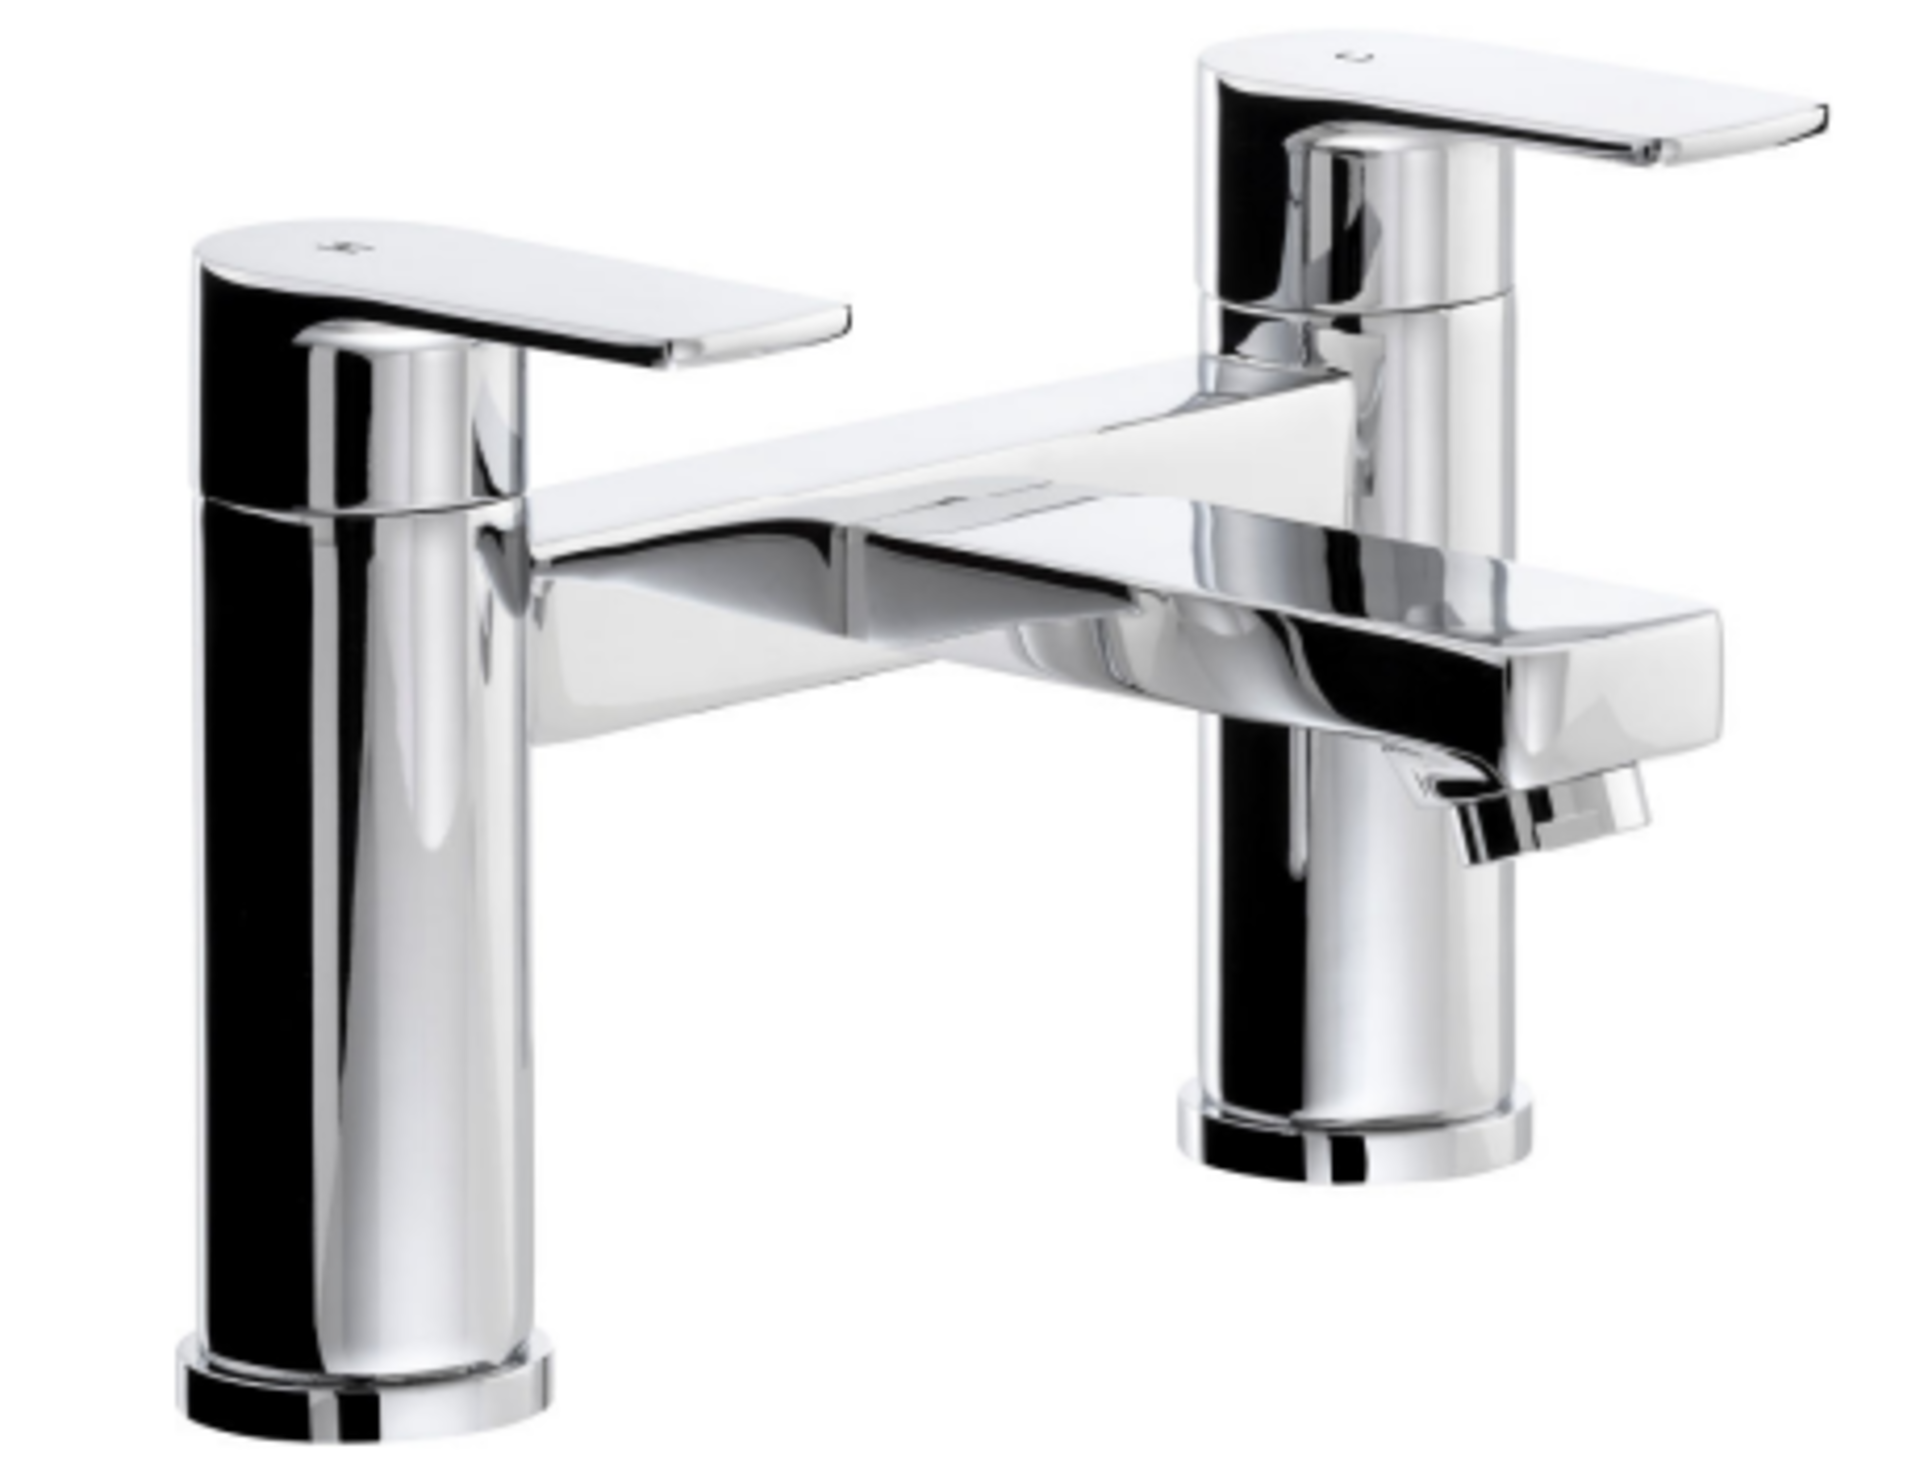 2 x NEW BOXED Abode Lamona CONTEMPORARY CHROME BATH TAPS. RRP £129.99 EACH, GIVING THIS LOT A